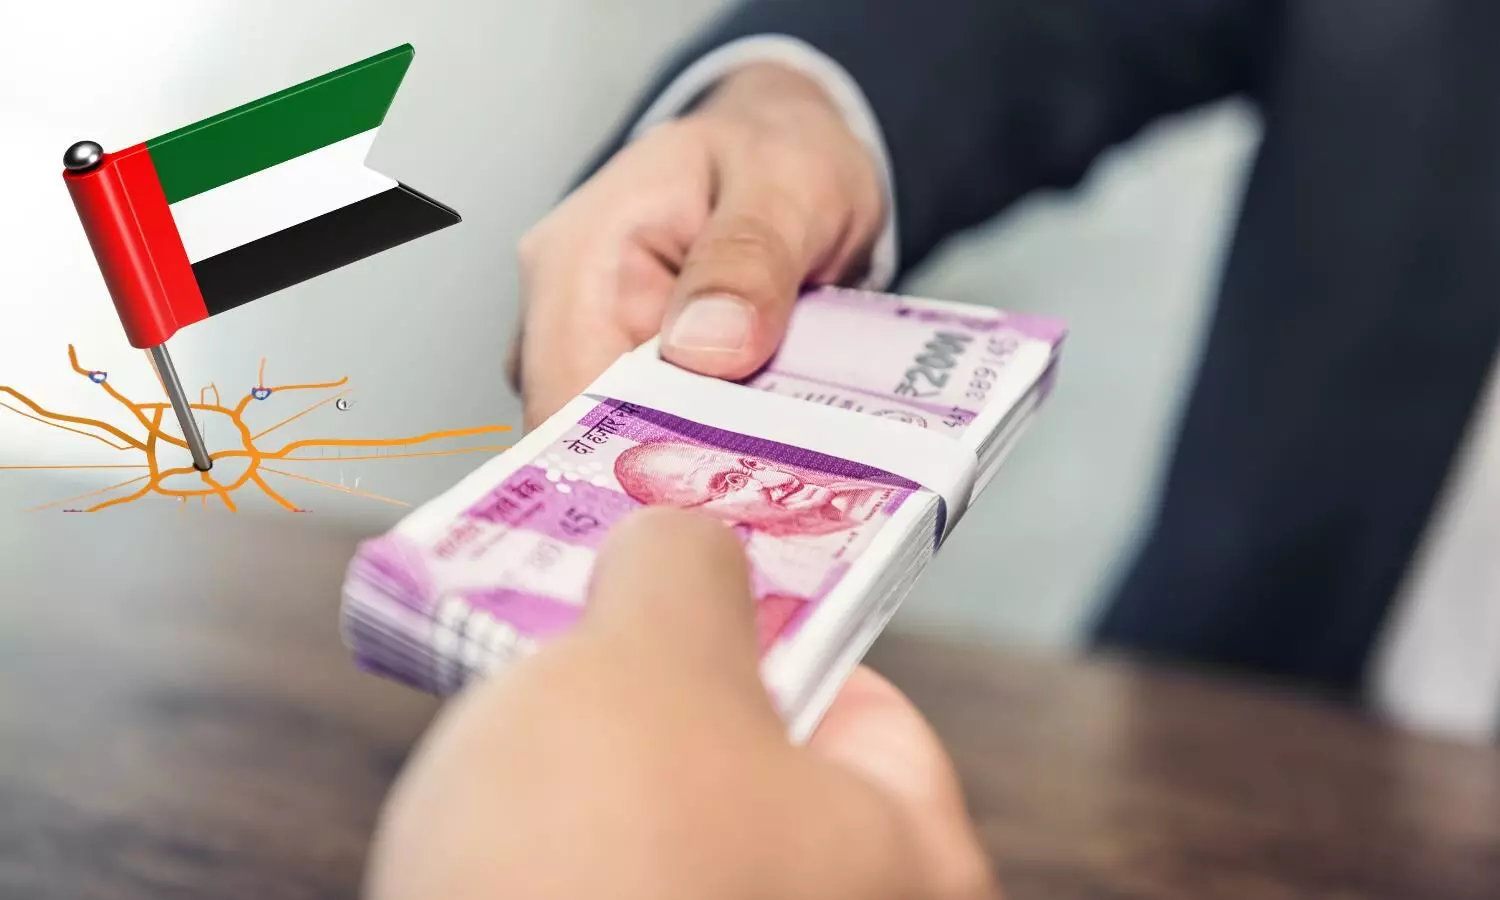 Rs 2000 note and UAE Flag